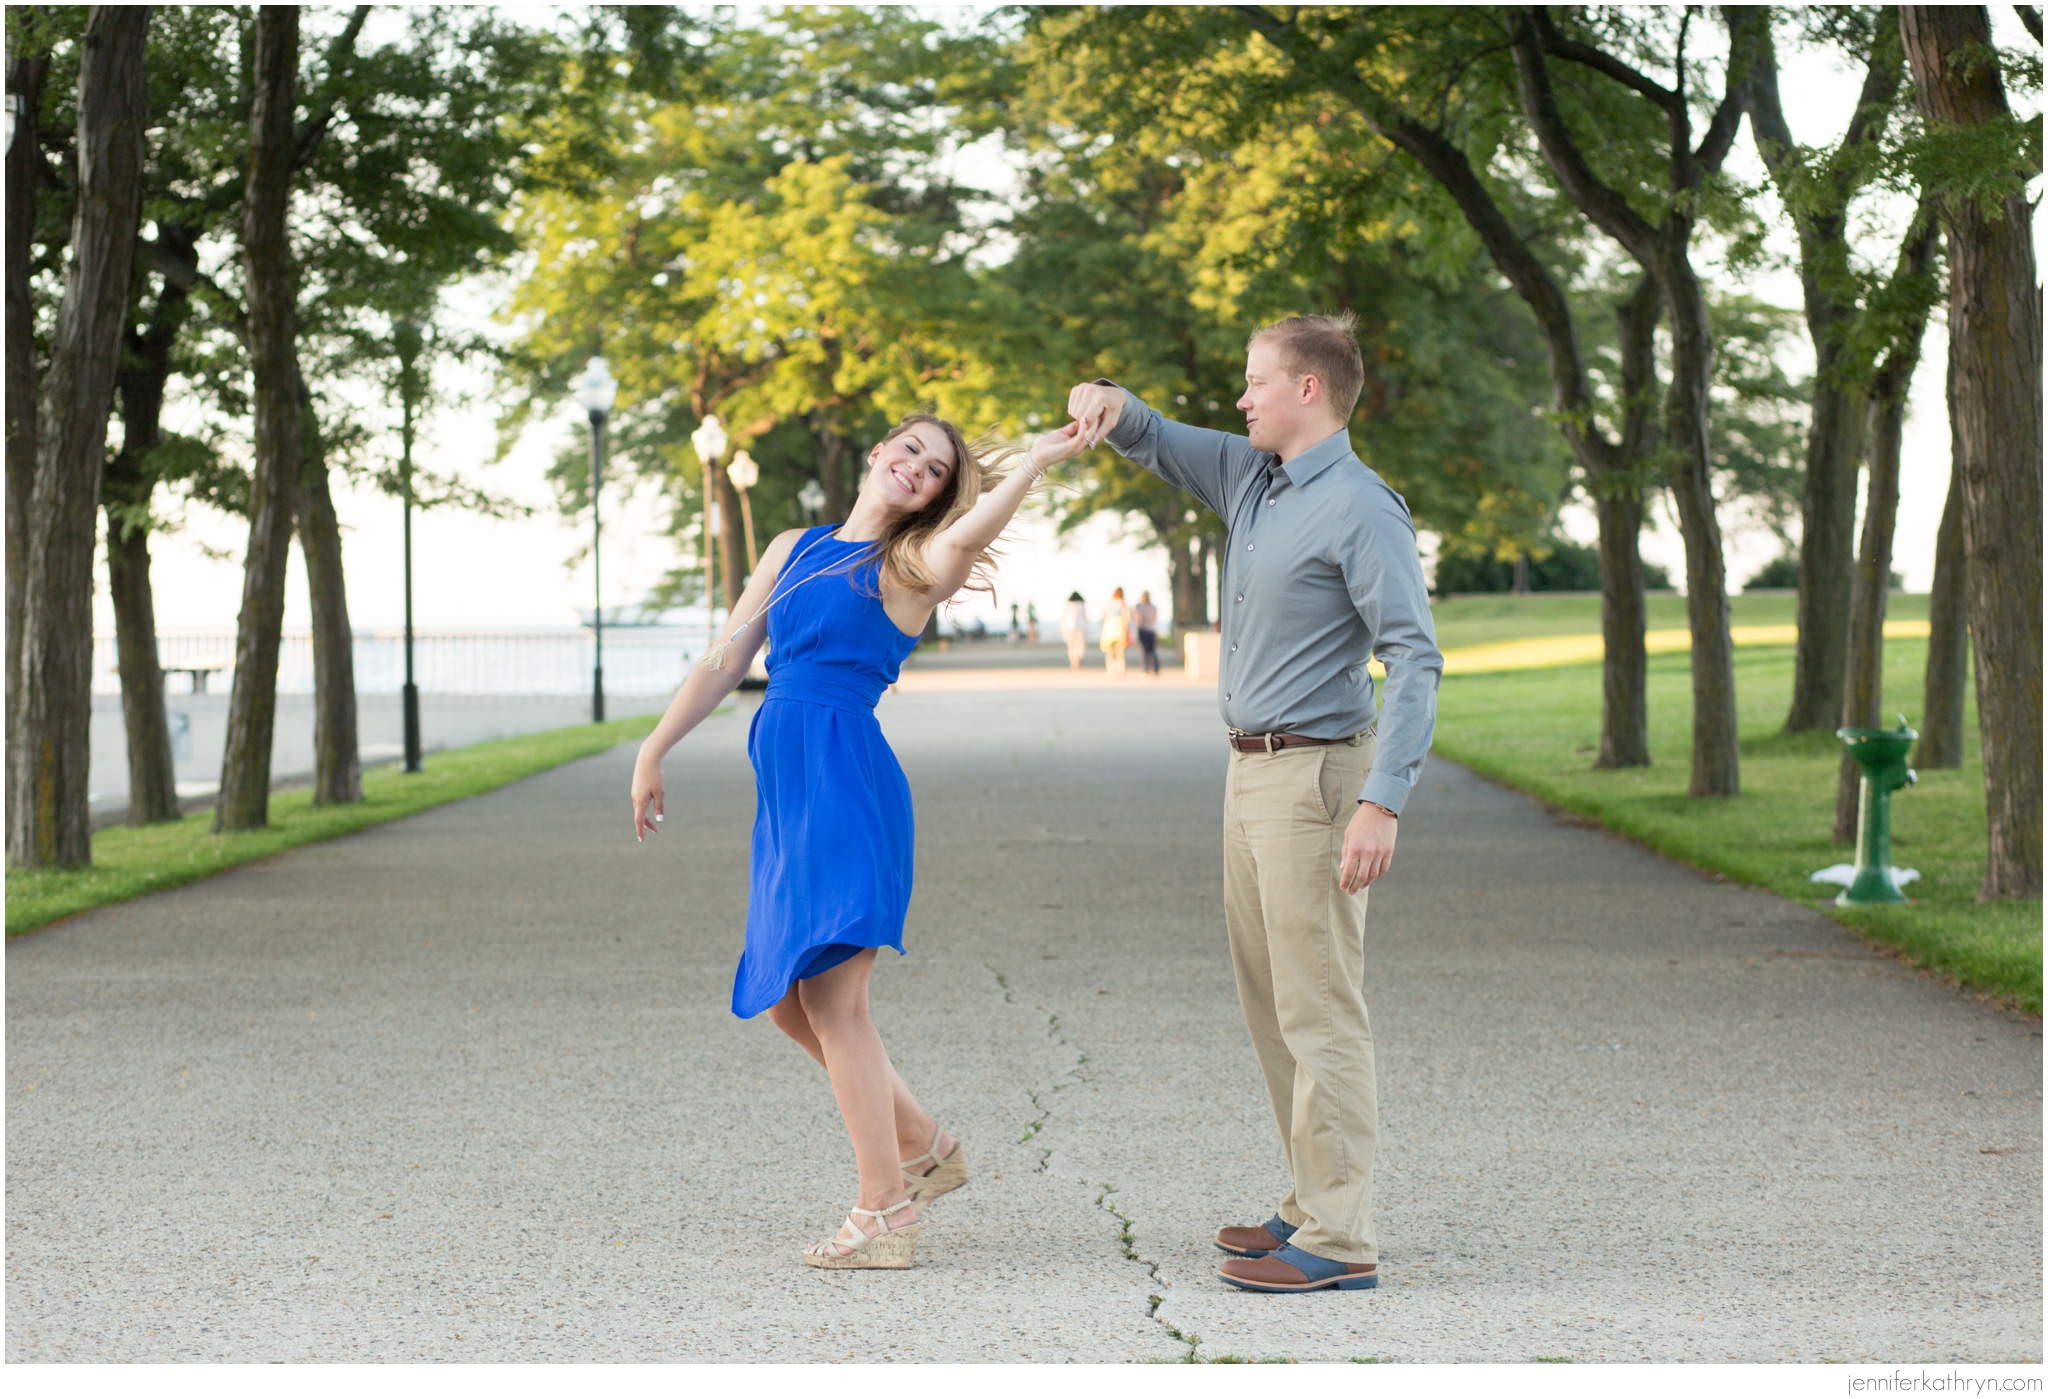 8-1-16 Nick and Morgan Engagement Session Chicago, IL (C)2016 Jennifer Kathryn Photography